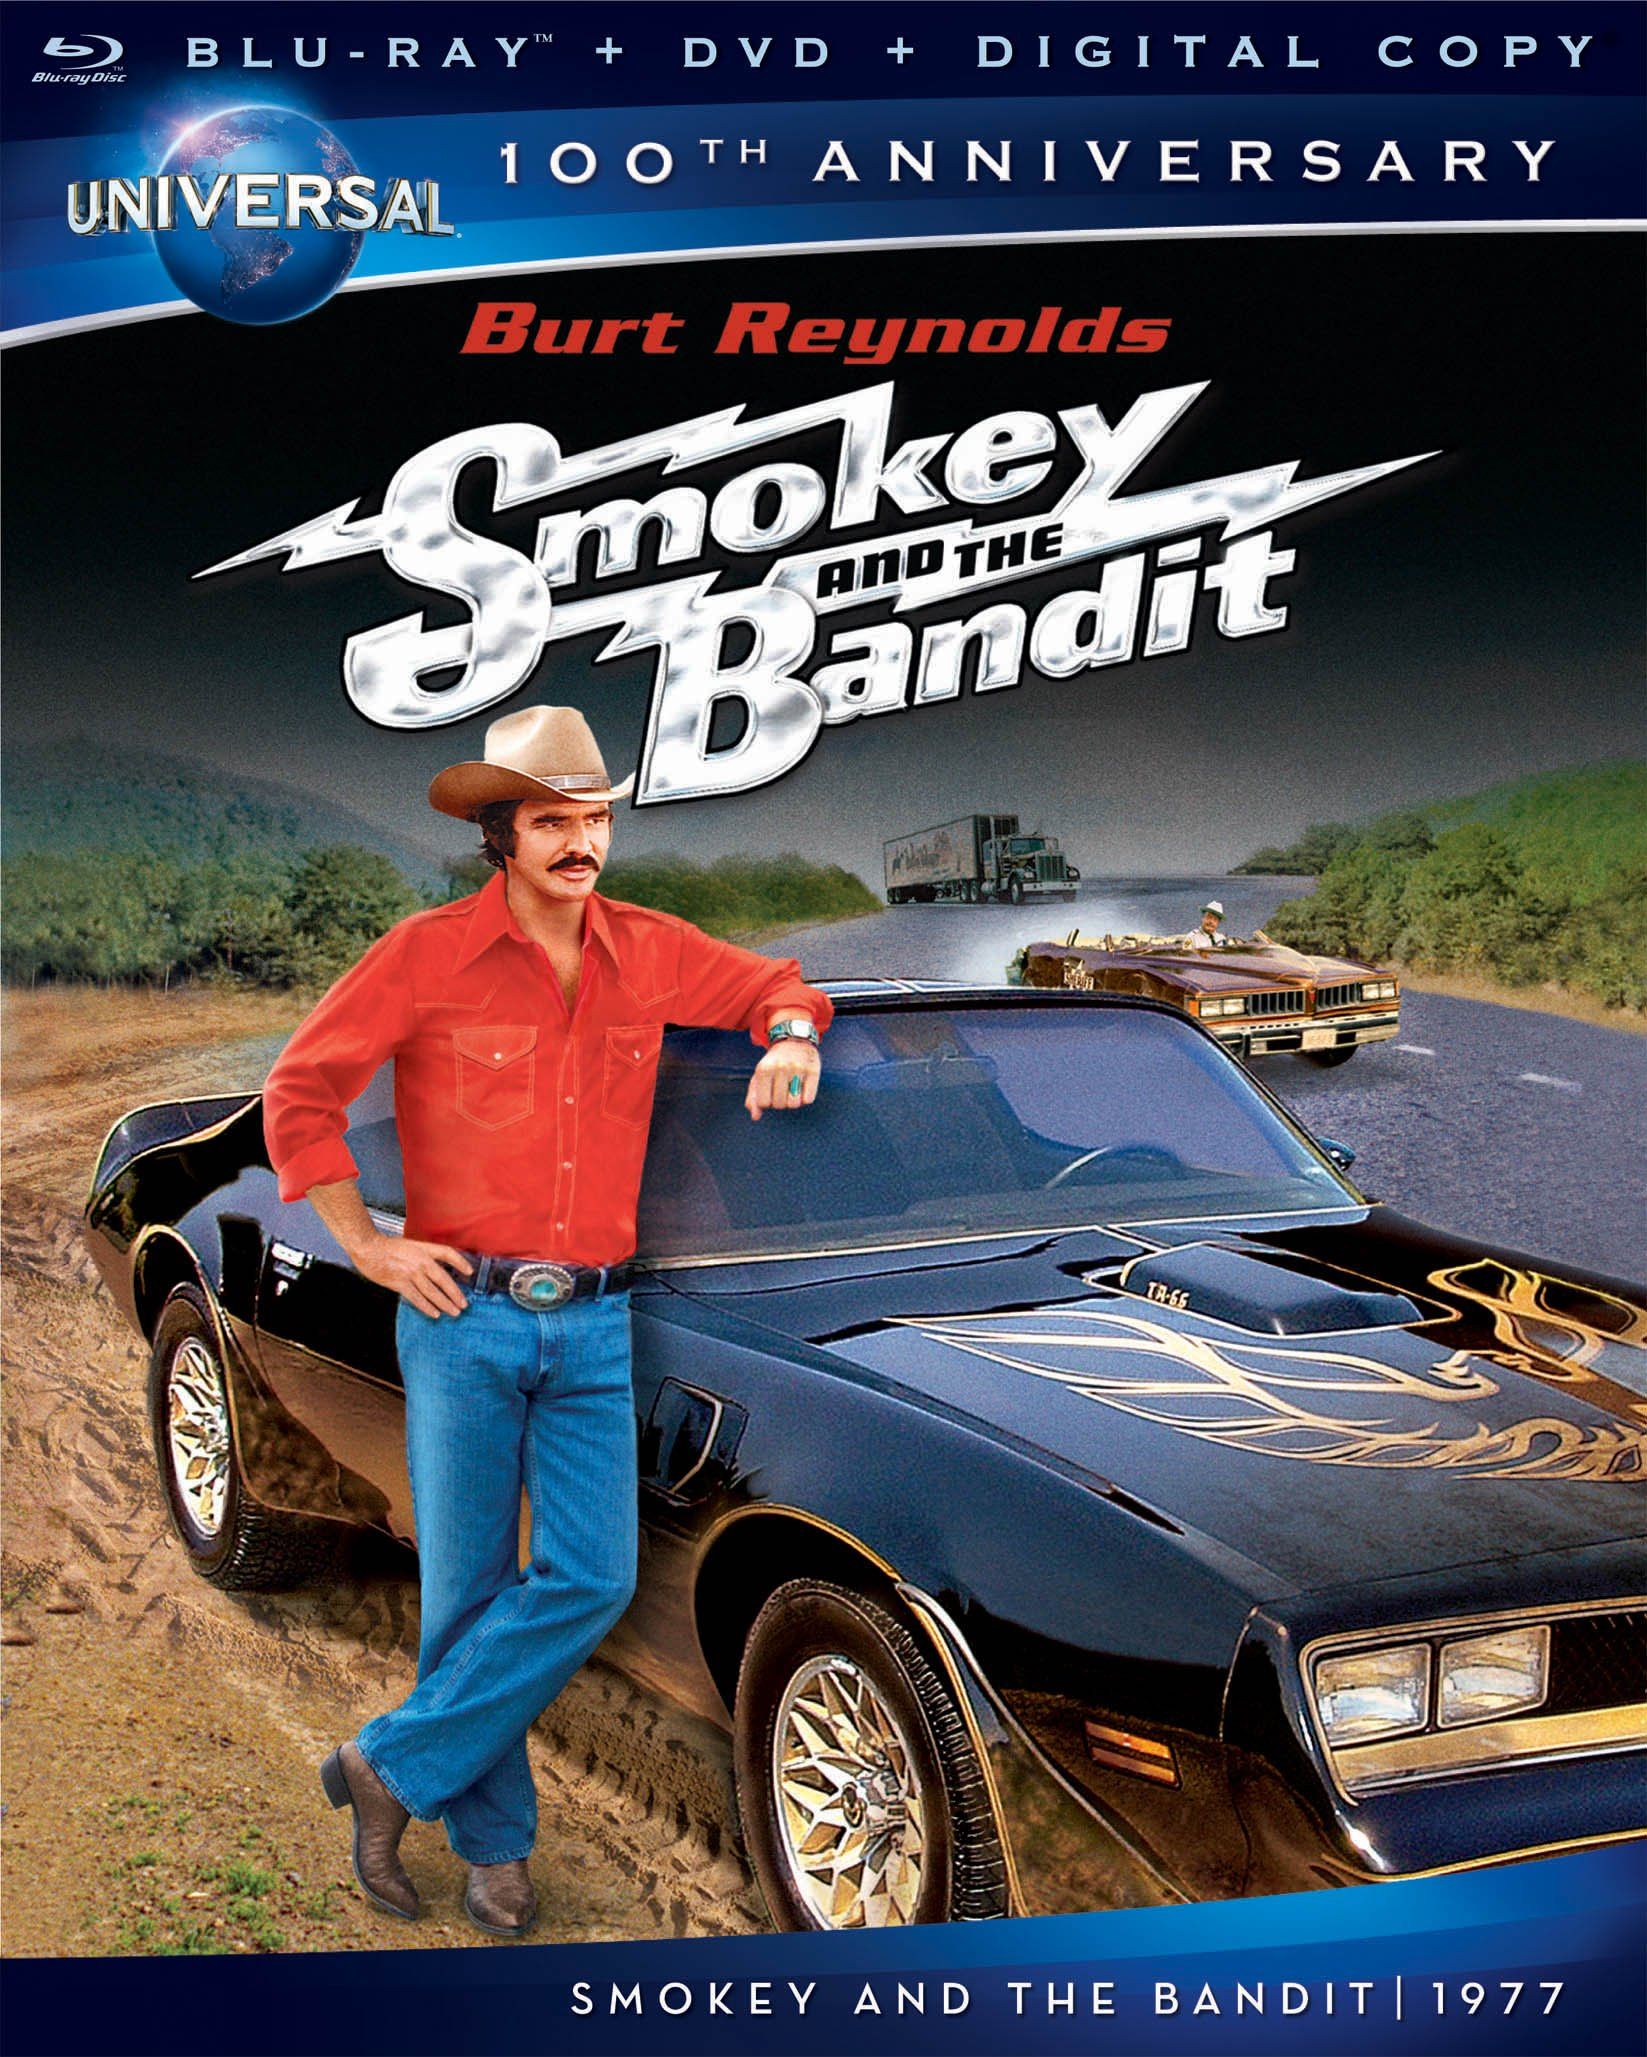 1647x2057px Smokey And The Bandit 573.56 KB